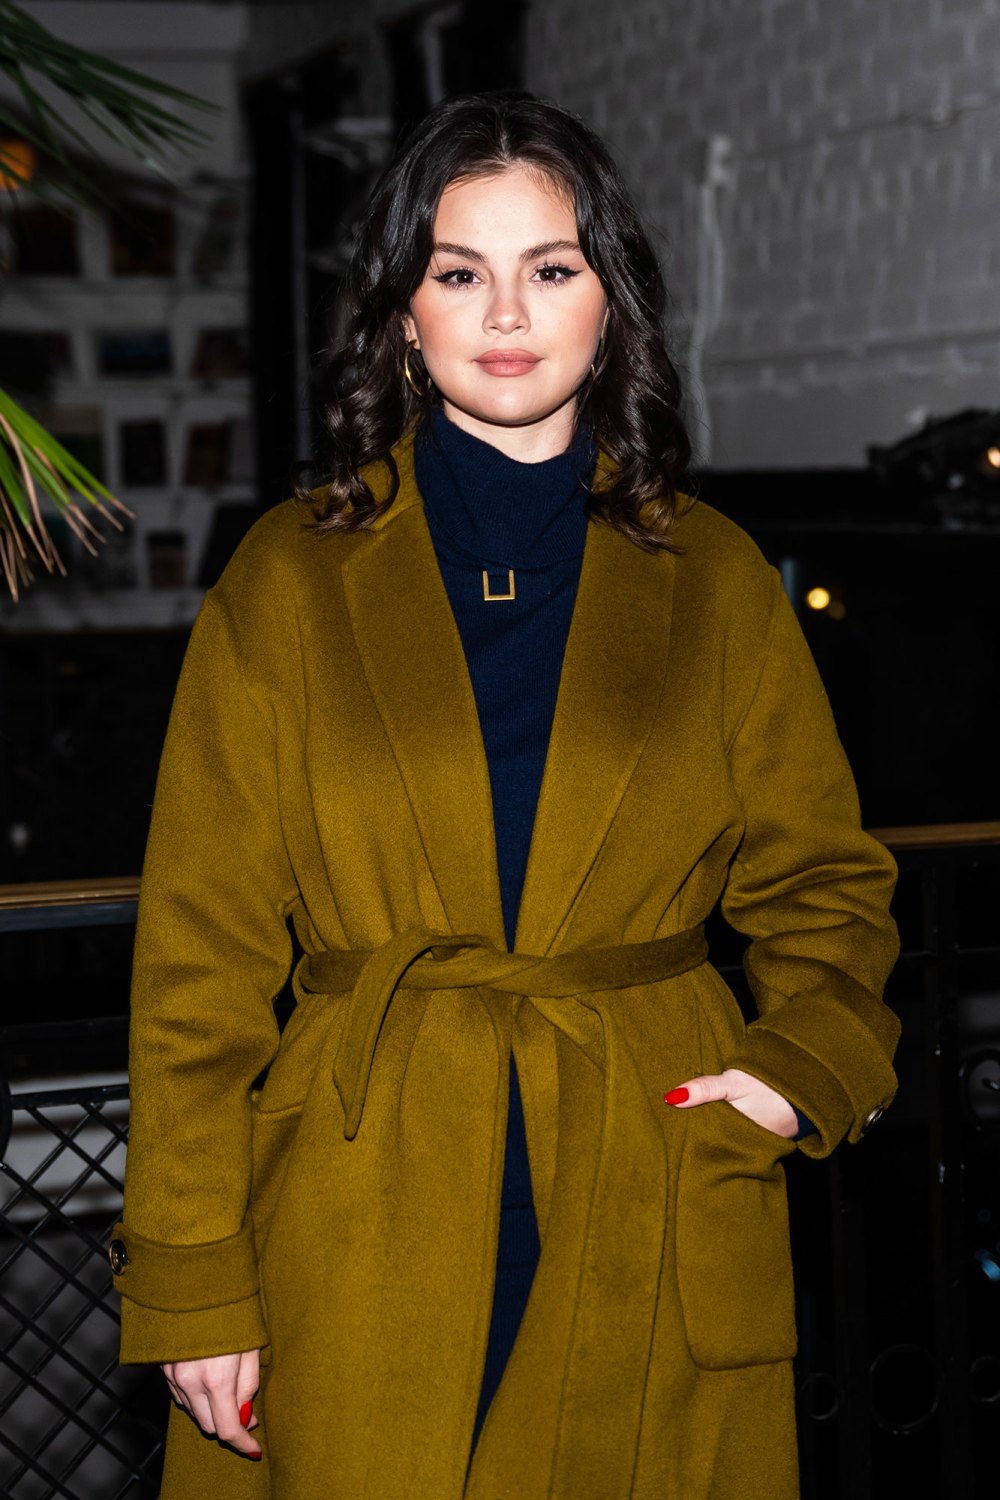 Selena Gomez reveals she was against her Apple TV documentary and will never watch it again